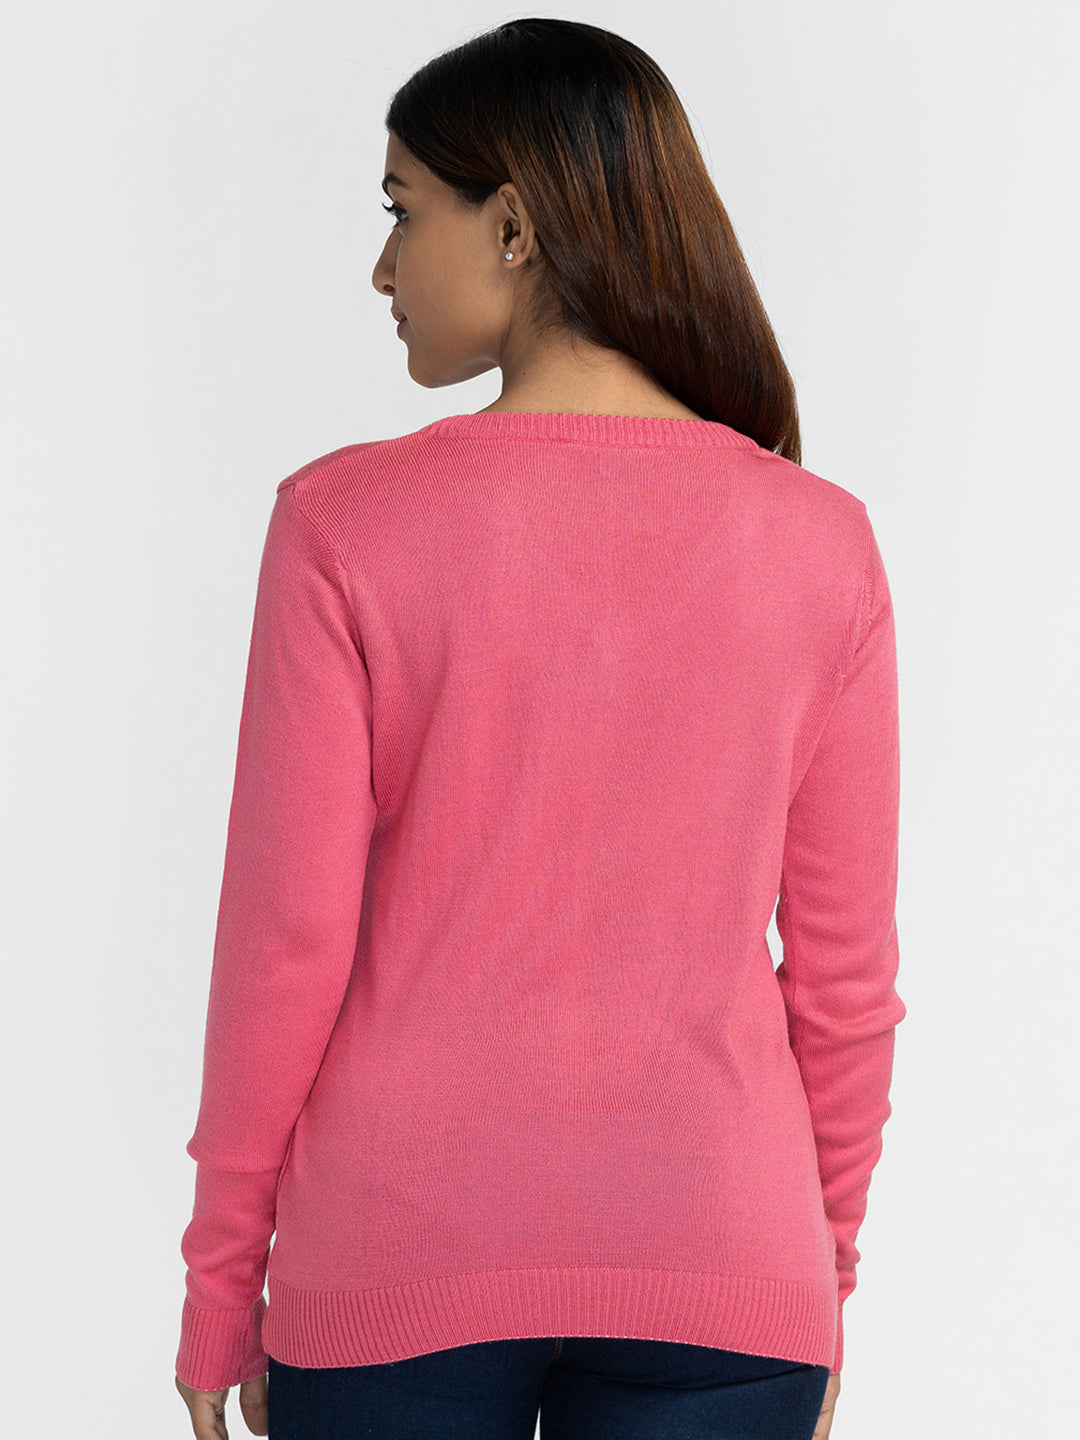 Globus Pink Solid Pullover Sweater